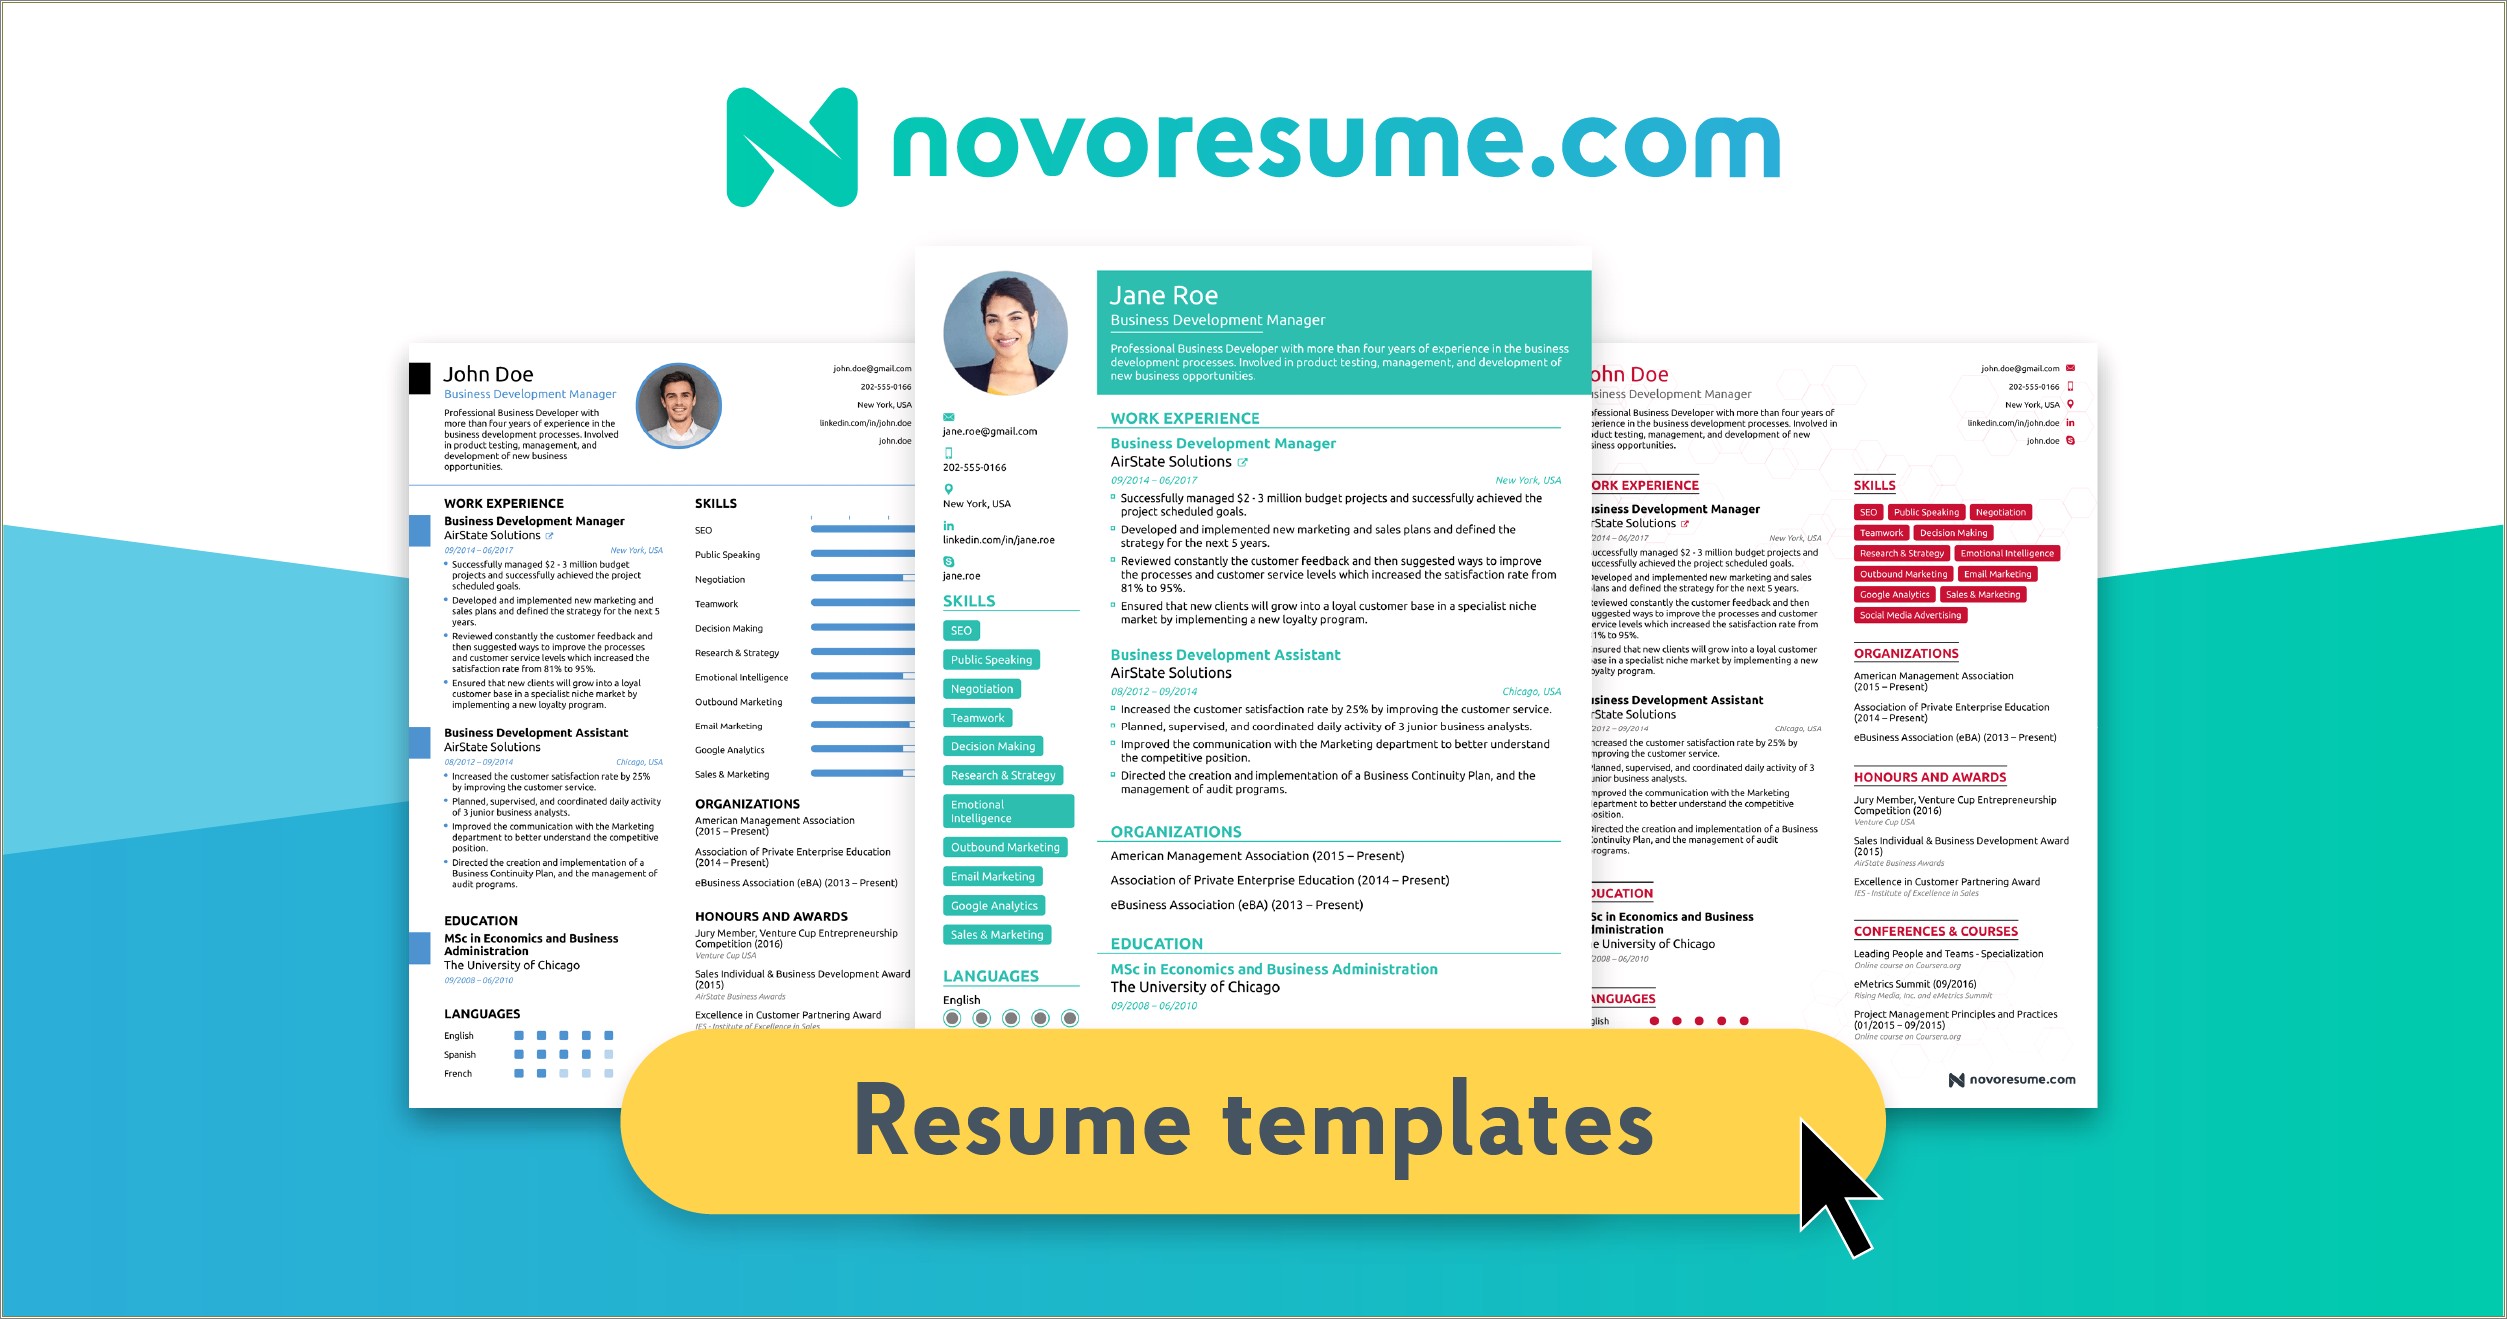 Free Resume Downloads For Windows 7